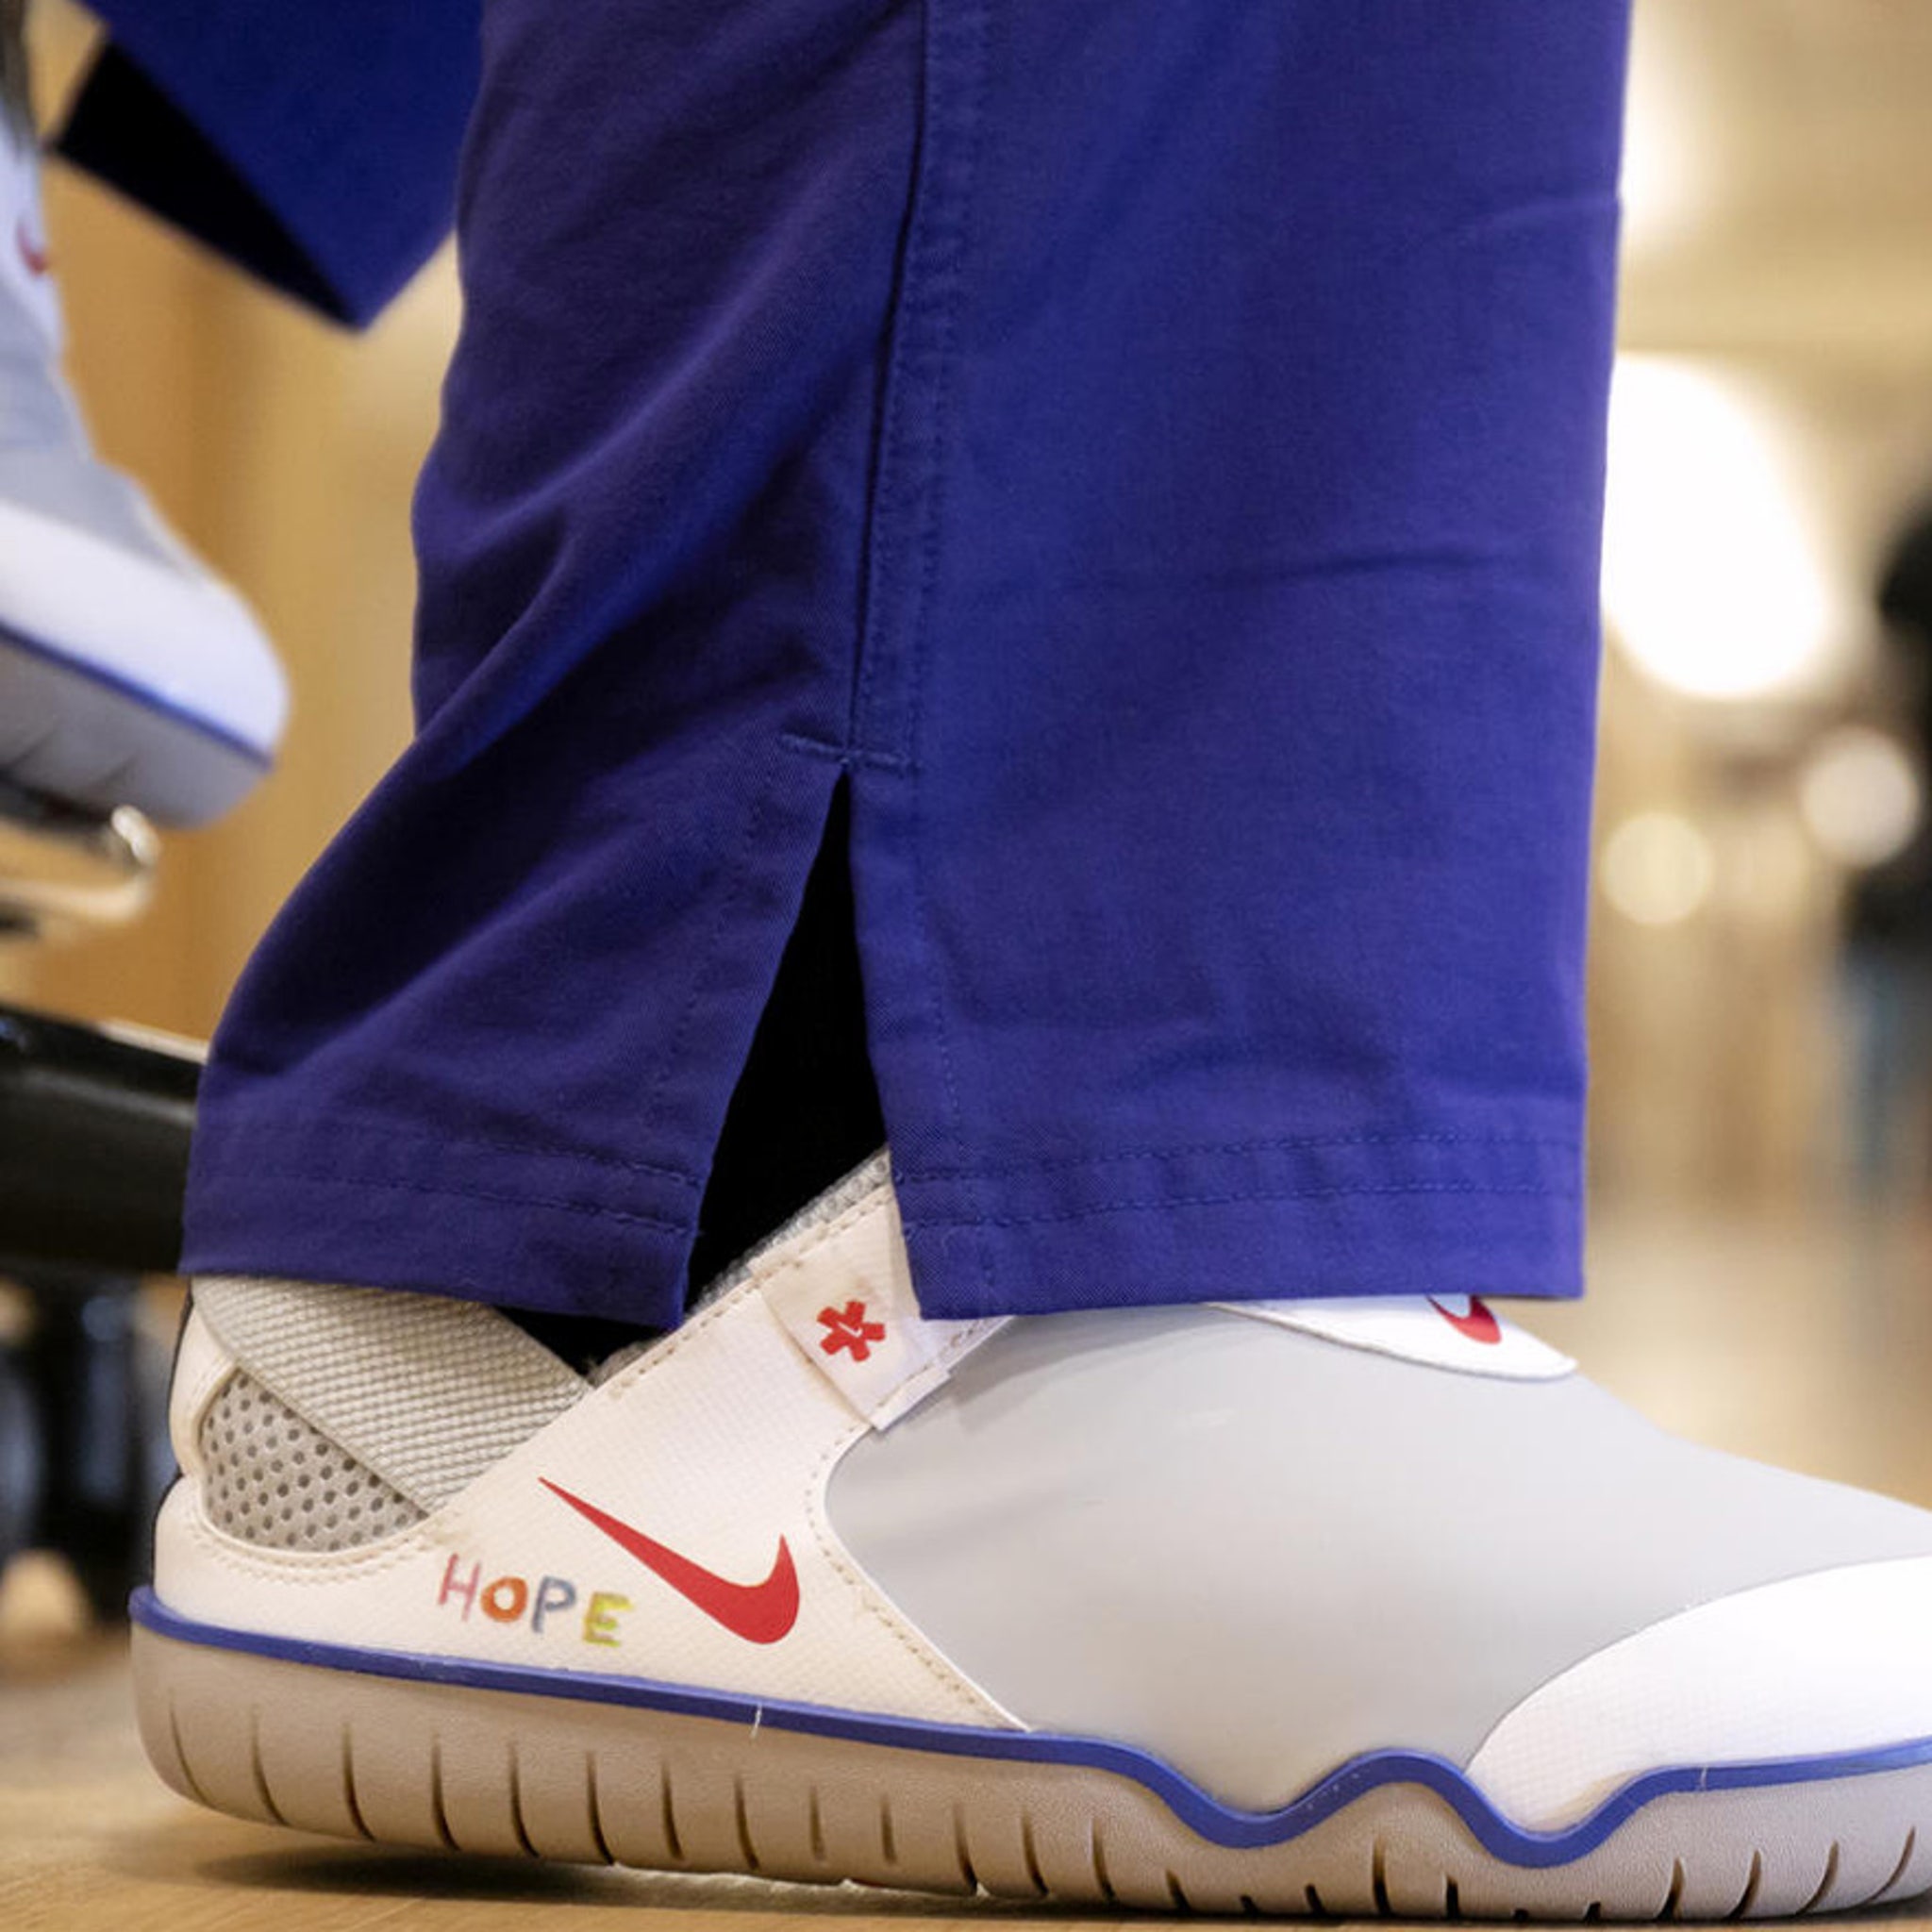 free nike shoes for healthcare workers sign up